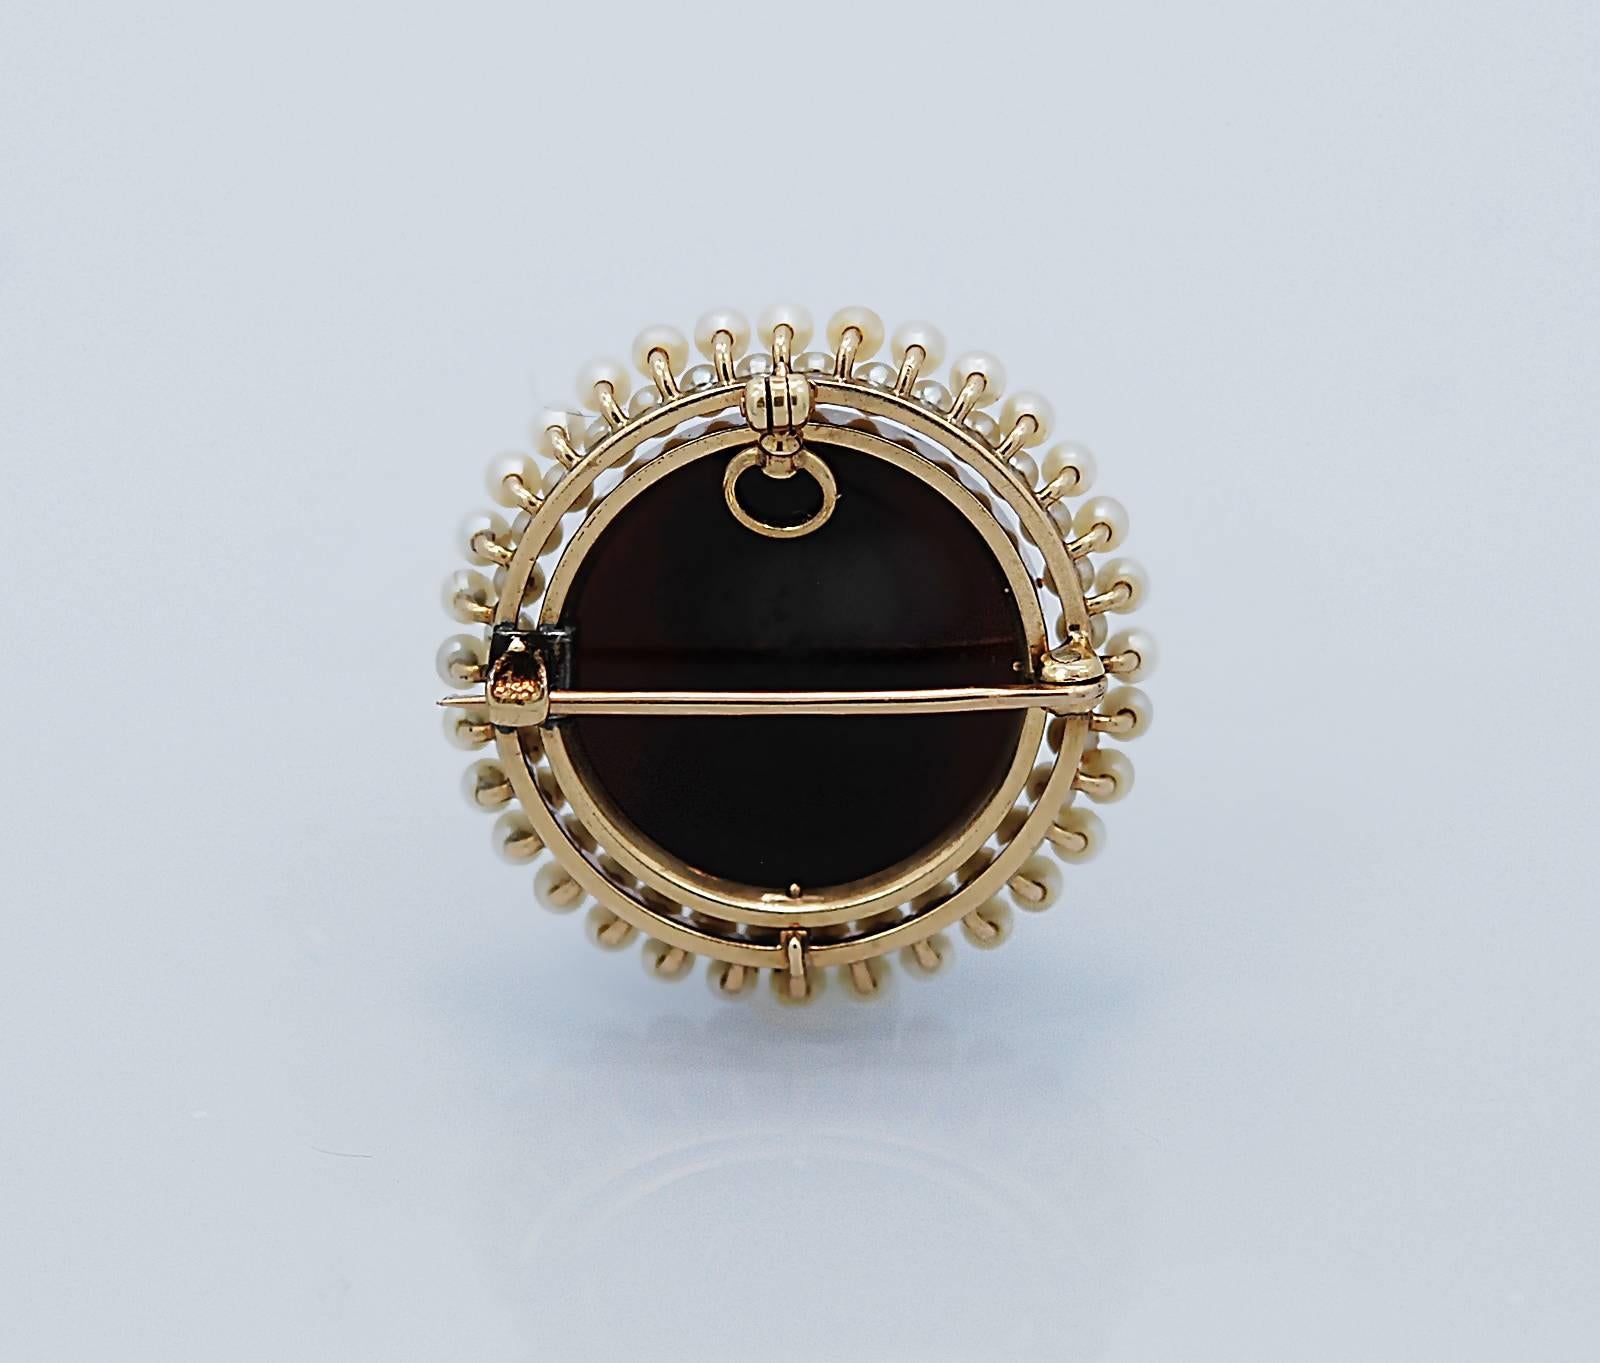 A gorgeous Sardonyx Antique hardstone cameo pin/pendant with a detailed woman's bust created and signed by master carver, Marguerite, and numbered 5. This cameo is surrounded with two circles of seed pearls and is crafted in 14k yellow gold.